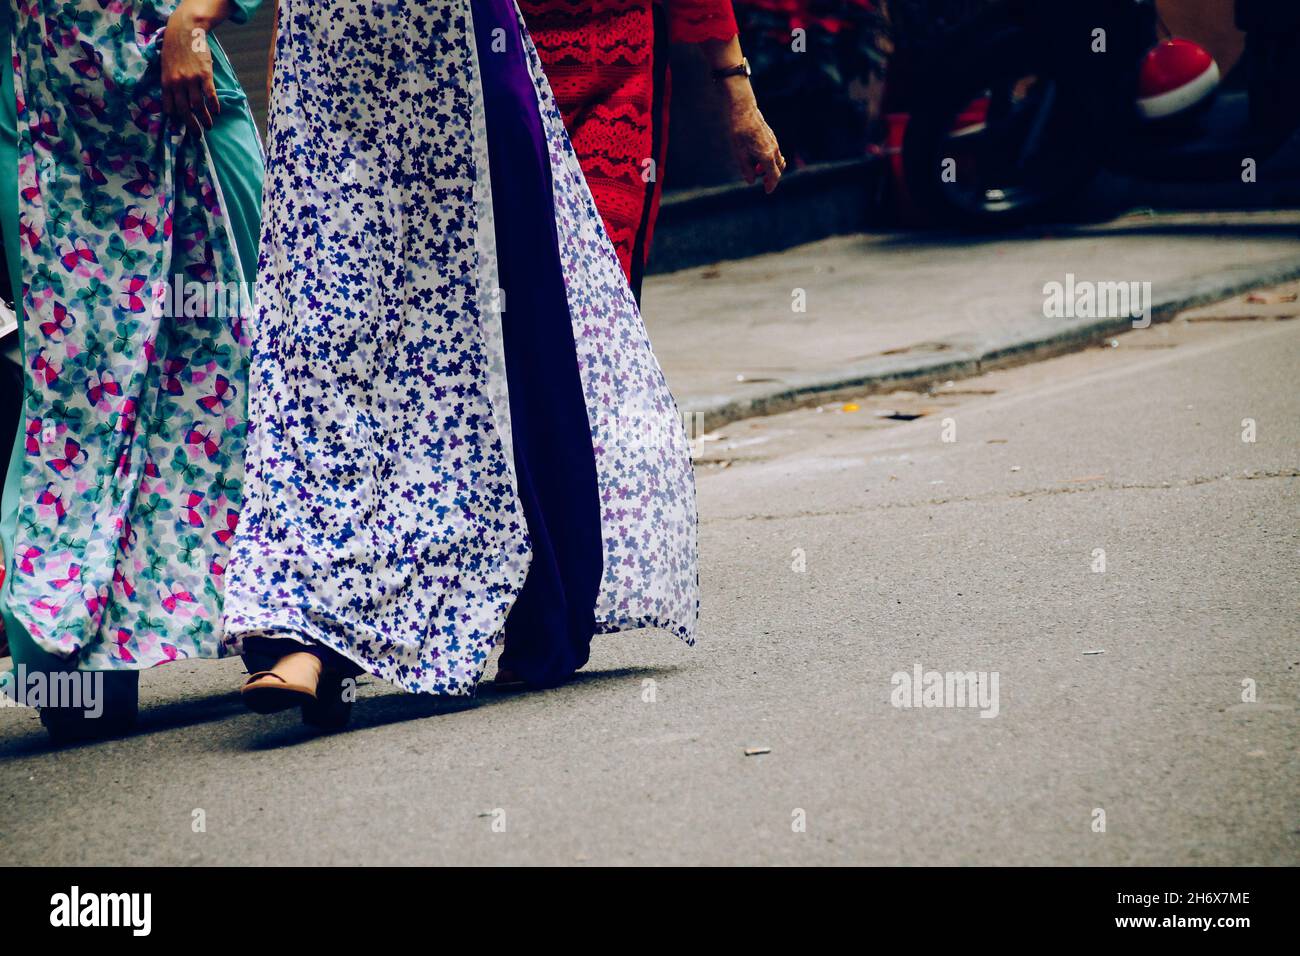 Low section of Vietnamese women walking in the street wearing traditional clothes called ao dai for the Tet Festival in Hanoi, Vietnam Stock Photo